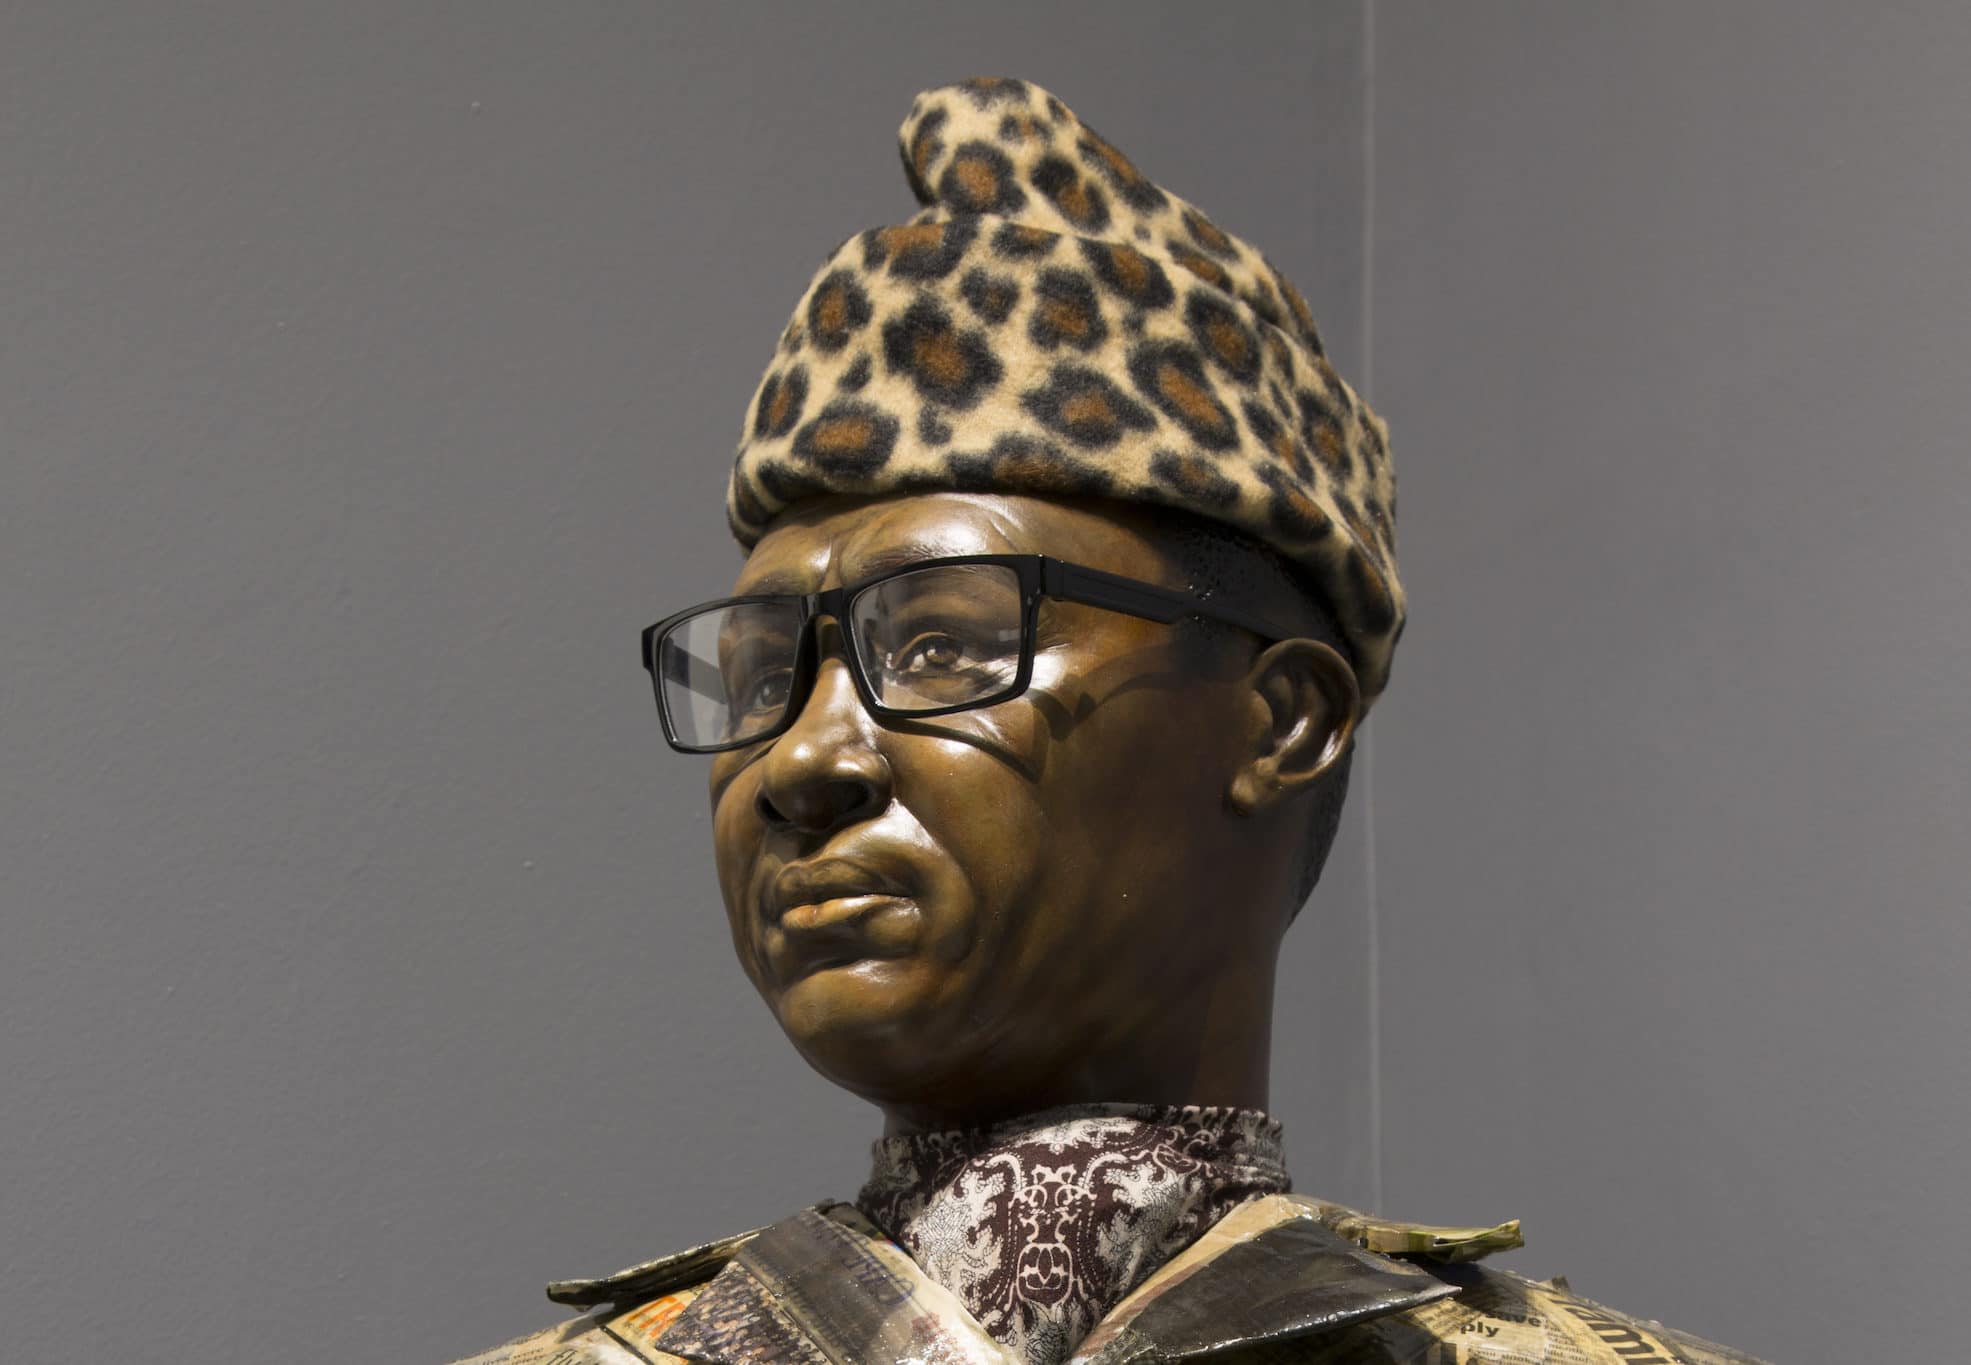 Maurice Mbikayi and Nicola Holgate. Two Rises and Falls (Mobutu). 2019. Papier maché and mixed media bust. 71 x 42 x 21 cm. Installation view.